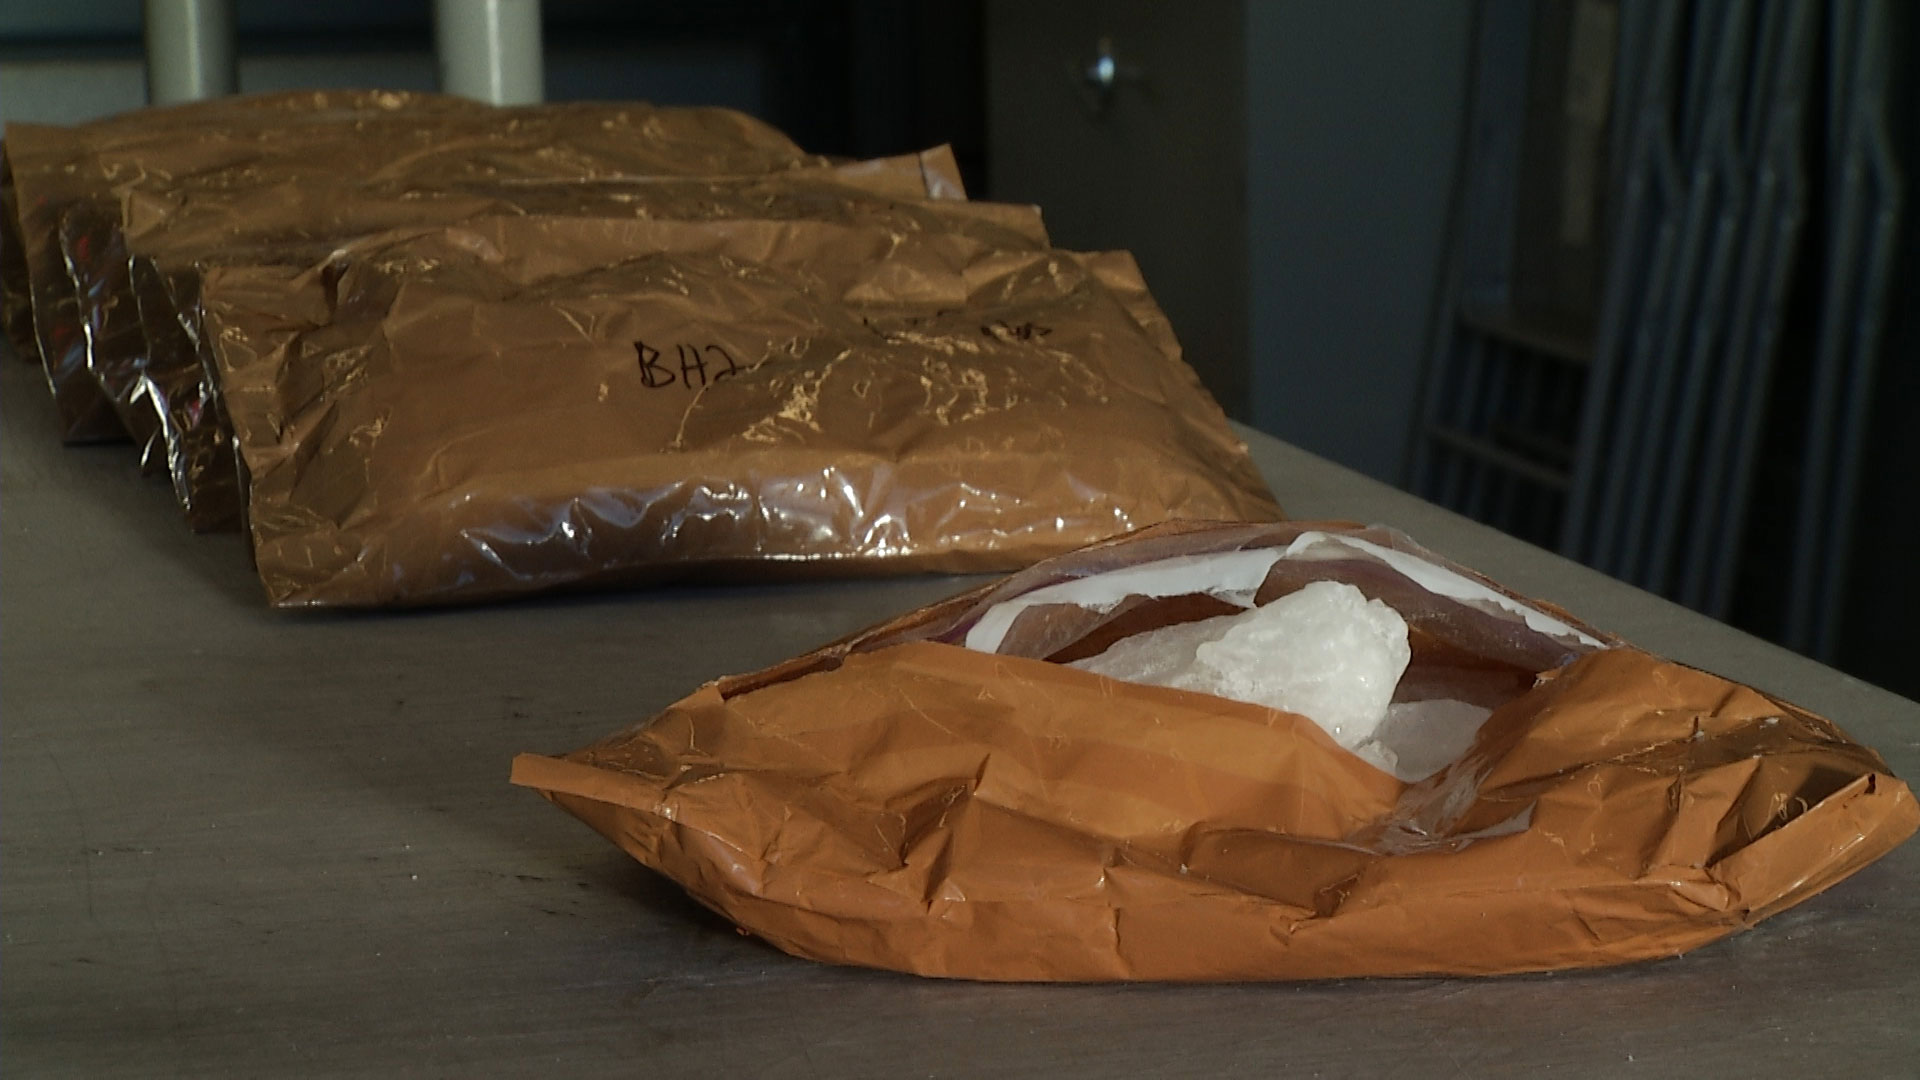 A package containing meth sits in an evidence room belonging to the Pima County Sheriff's Department. 